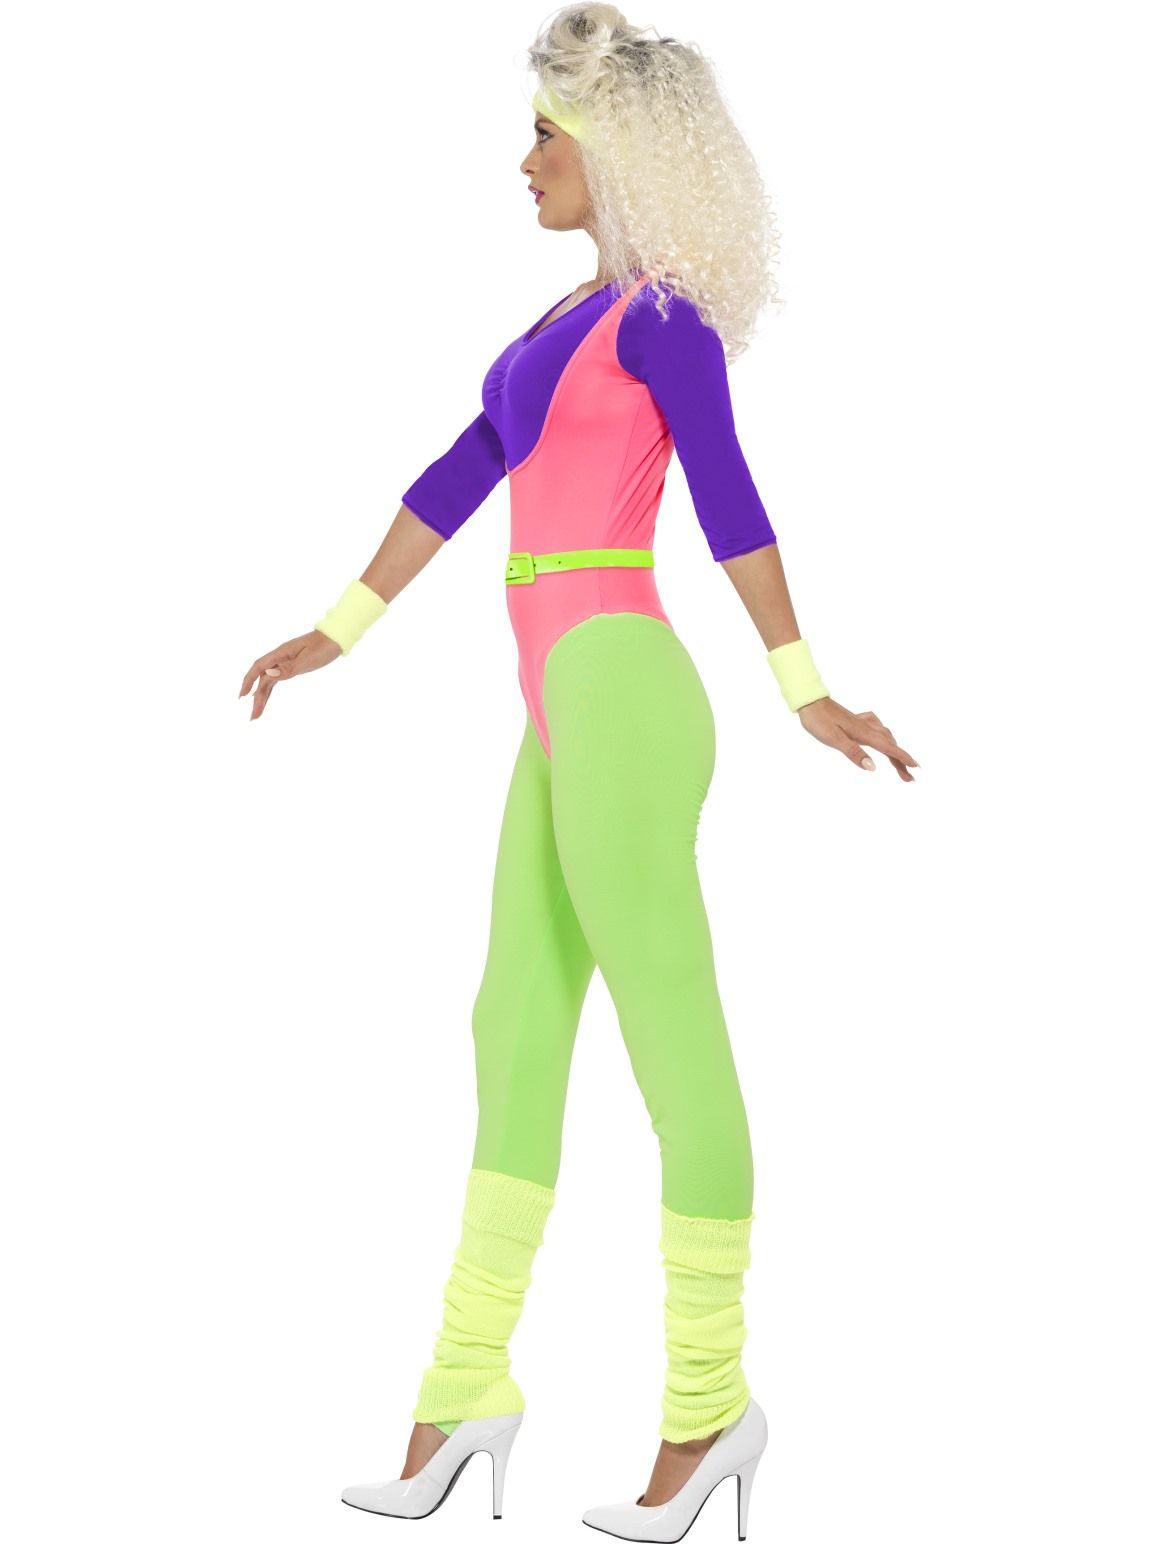 JMR dForce 80s Aerobics Outfit for G8F